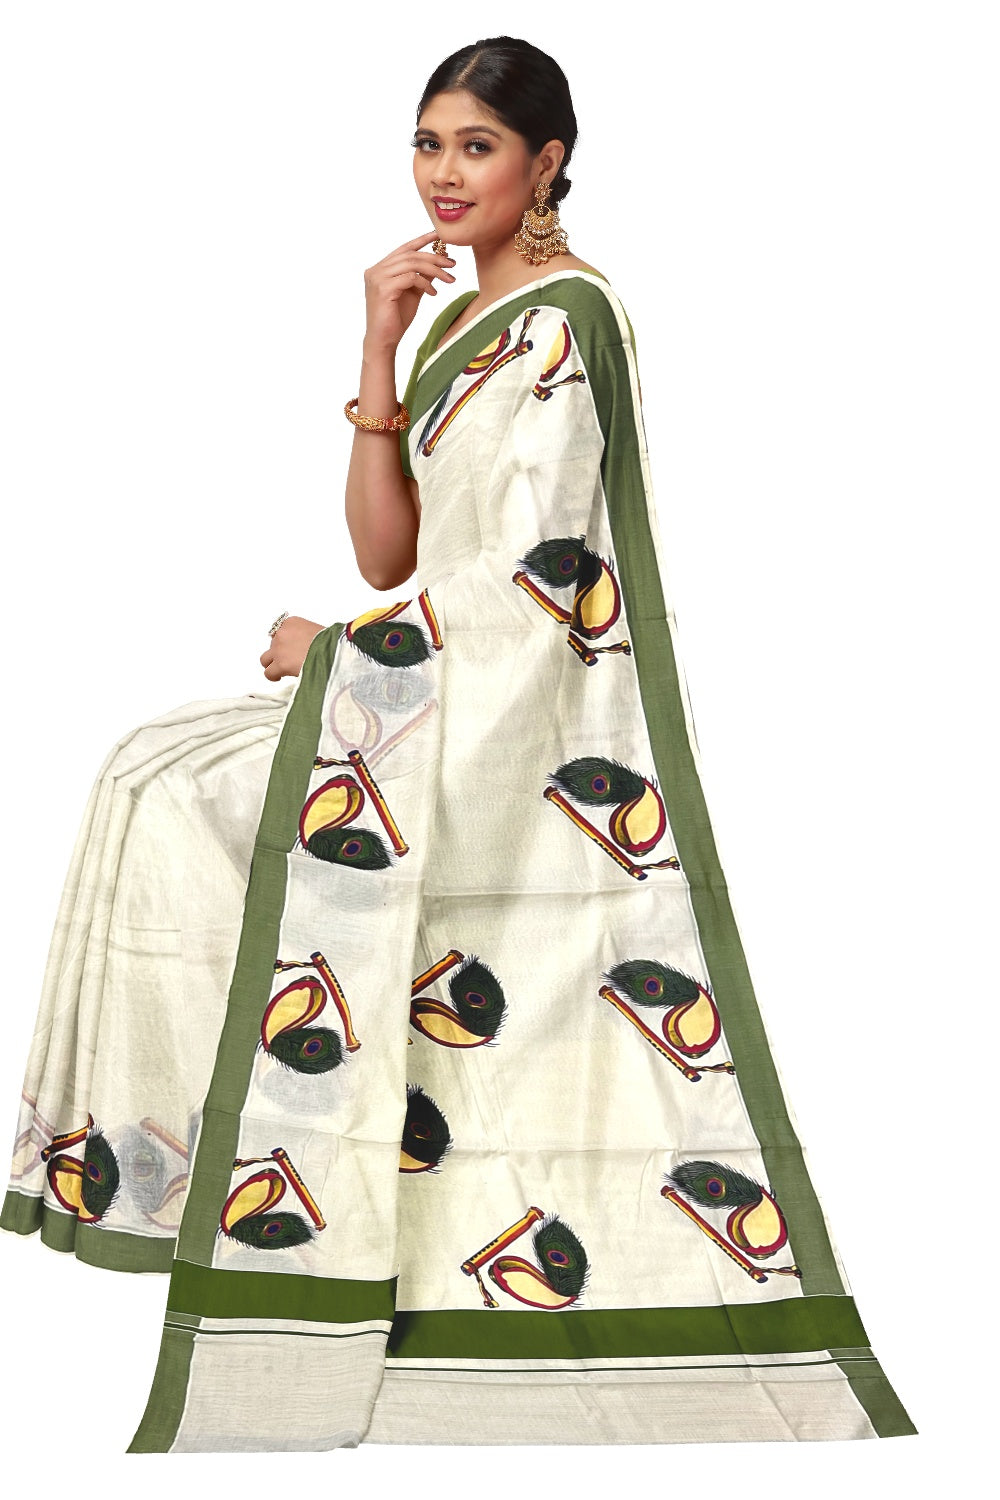 Kerala Pure Cotton Green Border Saree with Feather and Shell Mural Printed Design